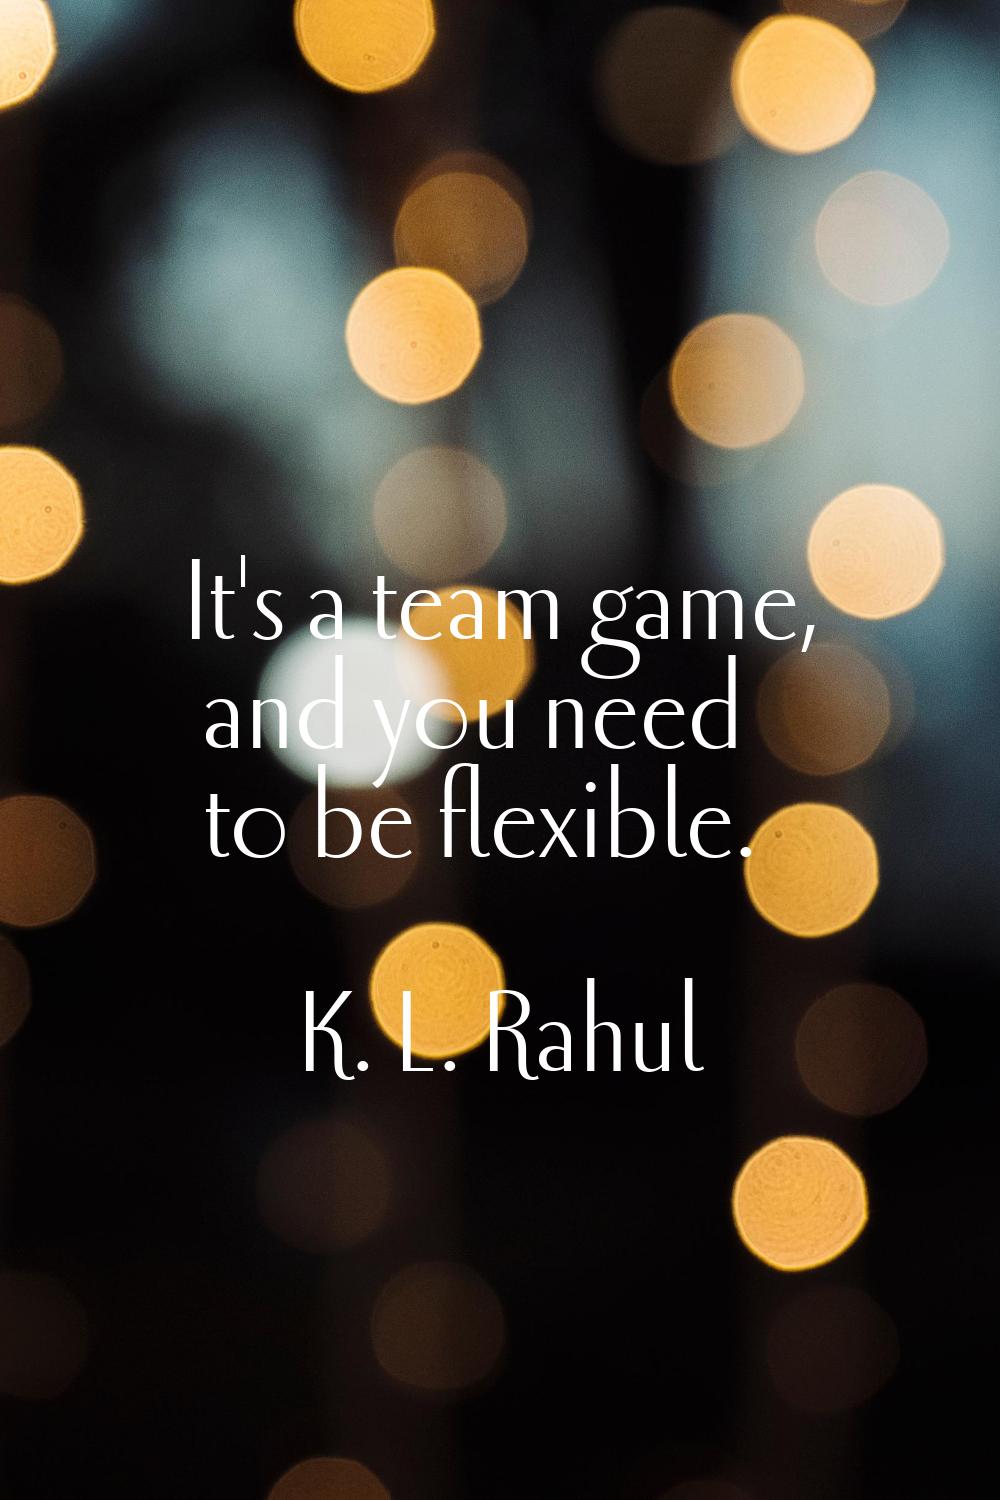 It's a team game, and you need to be flexible.